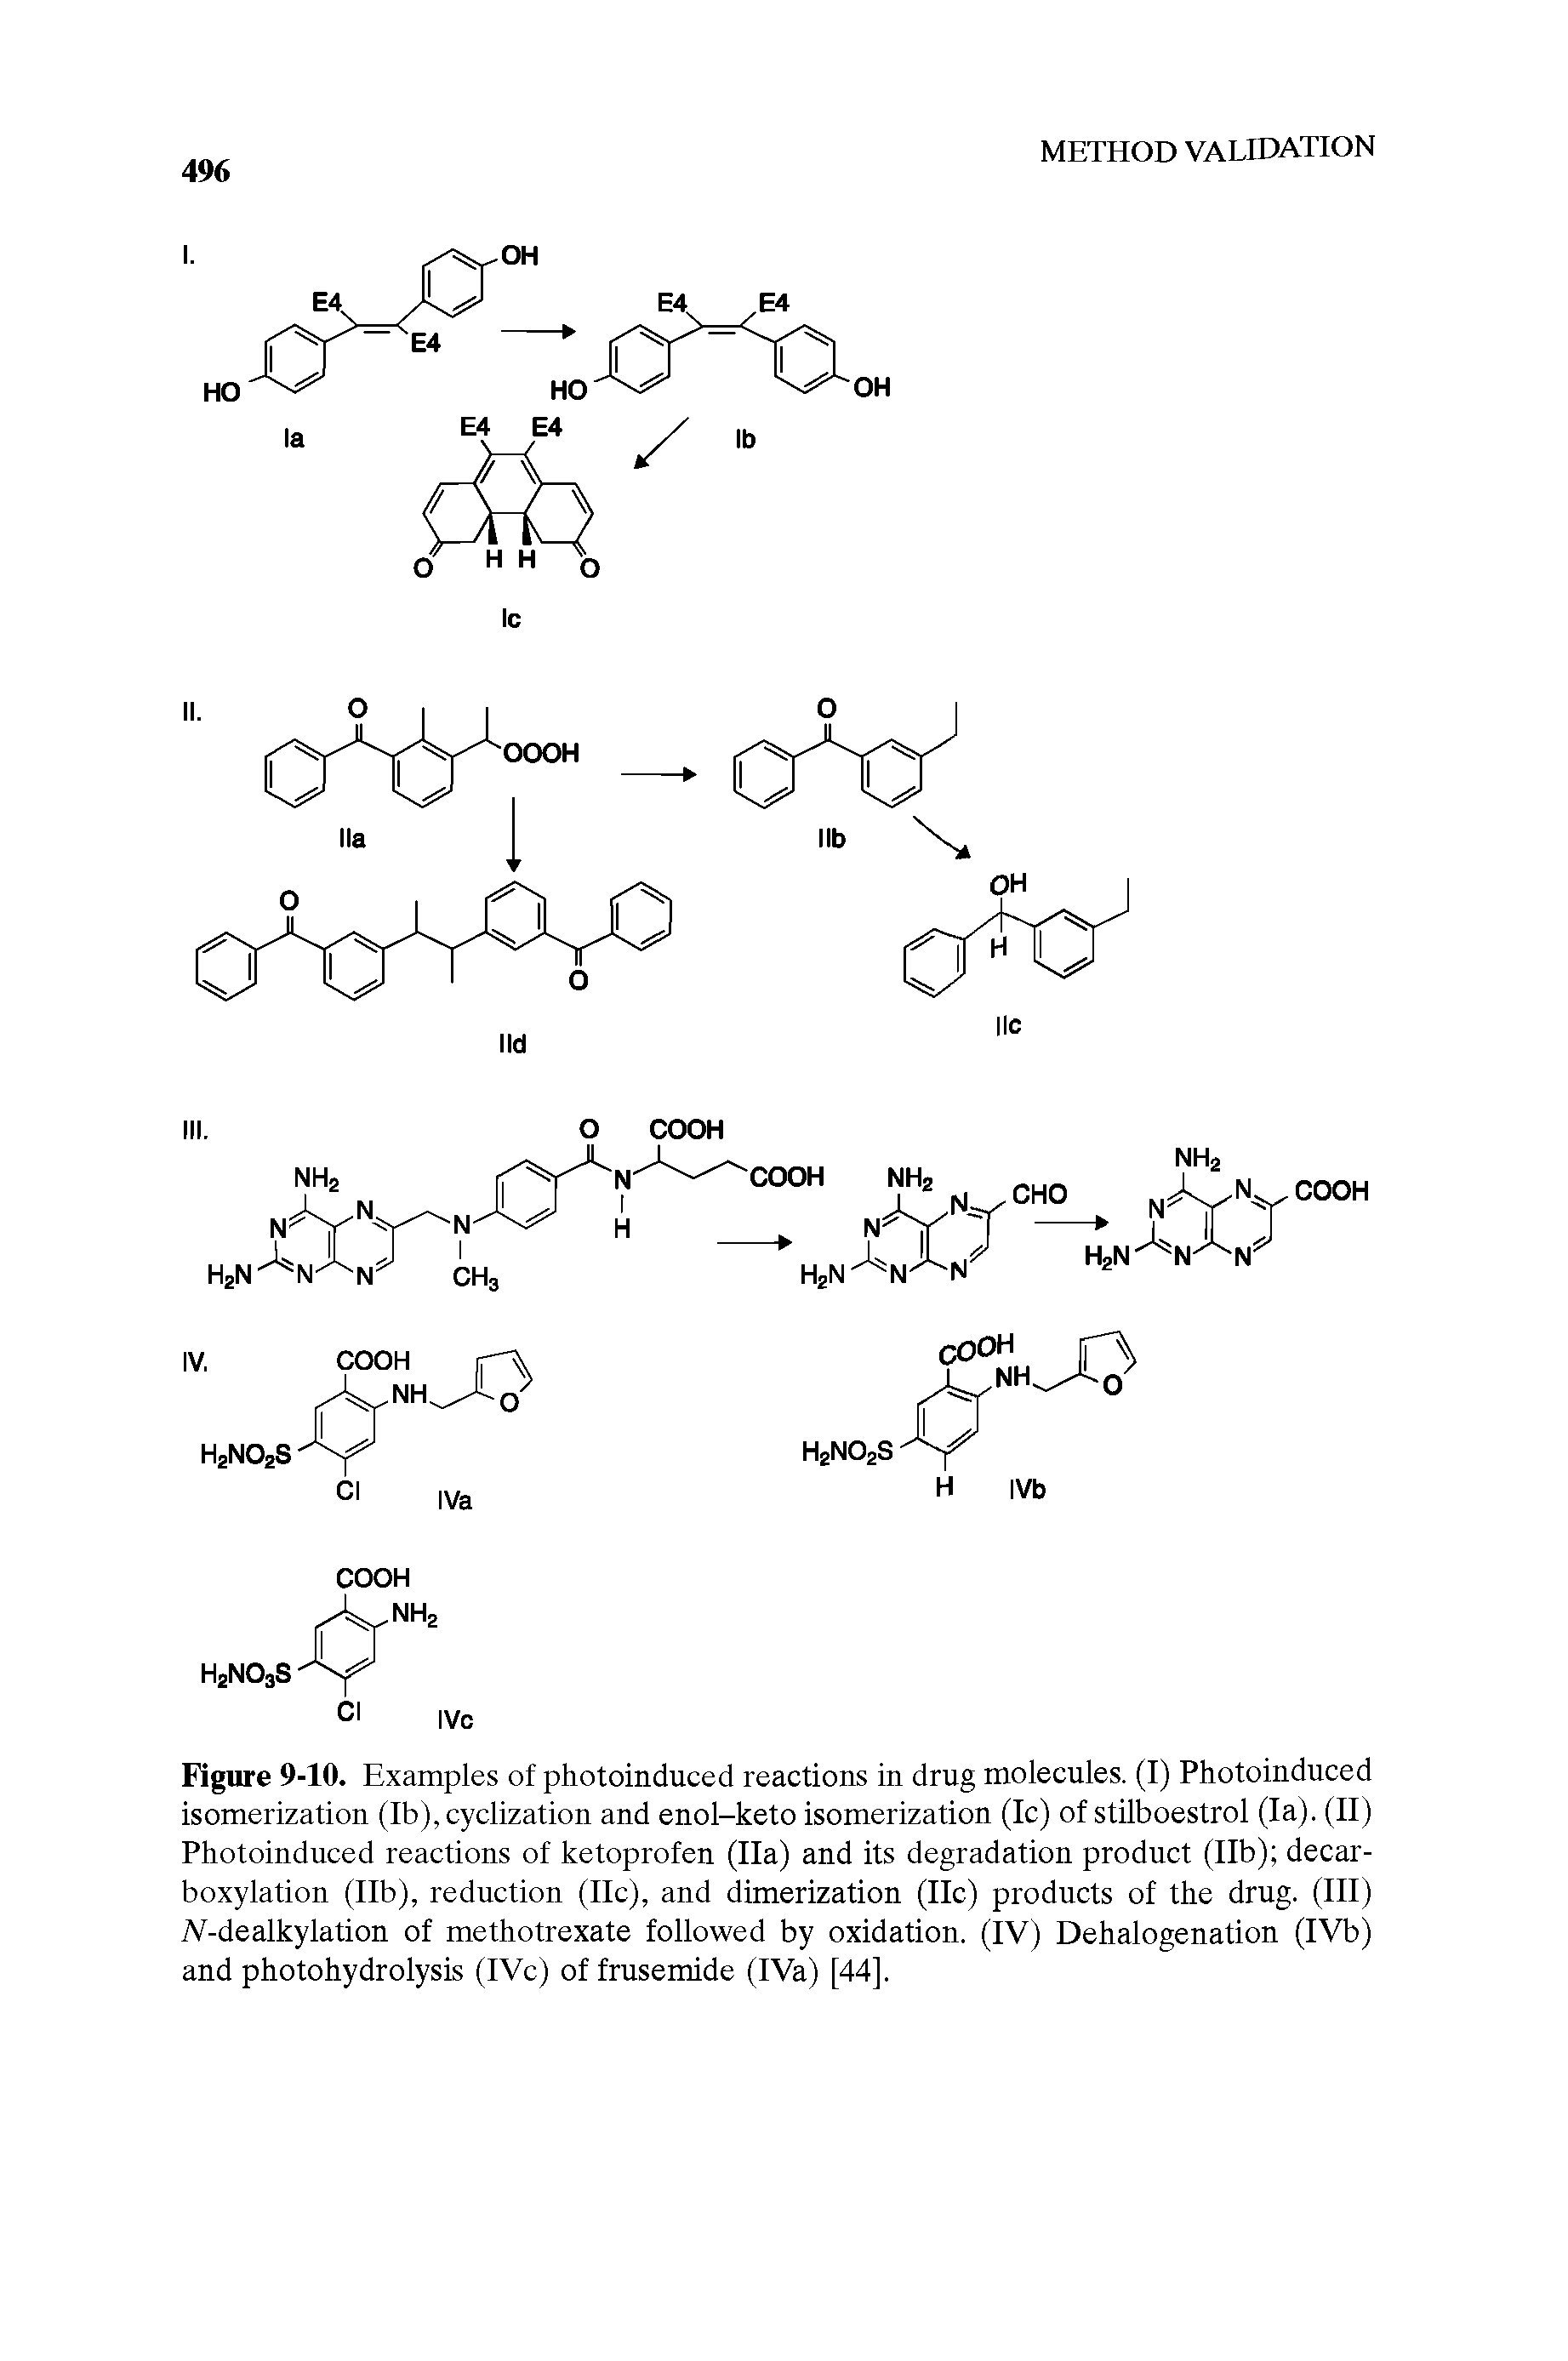 Figure 9-10. Examples of photoinduced reactions in drug molecules. (I) Photoinduced isomerization (Ib), cyclization and enol-keto isomerization (Ic) of stilboestrol (la). (II) Photoinduced reactions of ketoprofen (Ila) and its degradation product (Ilb) decarboxylation (Ilb), reduction (lie), and dimerization (IIc) products of the drug. (Ill) A -dealkylation of methotrexate followed by oxidation. (IV) Dehalogenation (IVb) and photohydrolysis (IVc) of frusemide (IVa) [44].